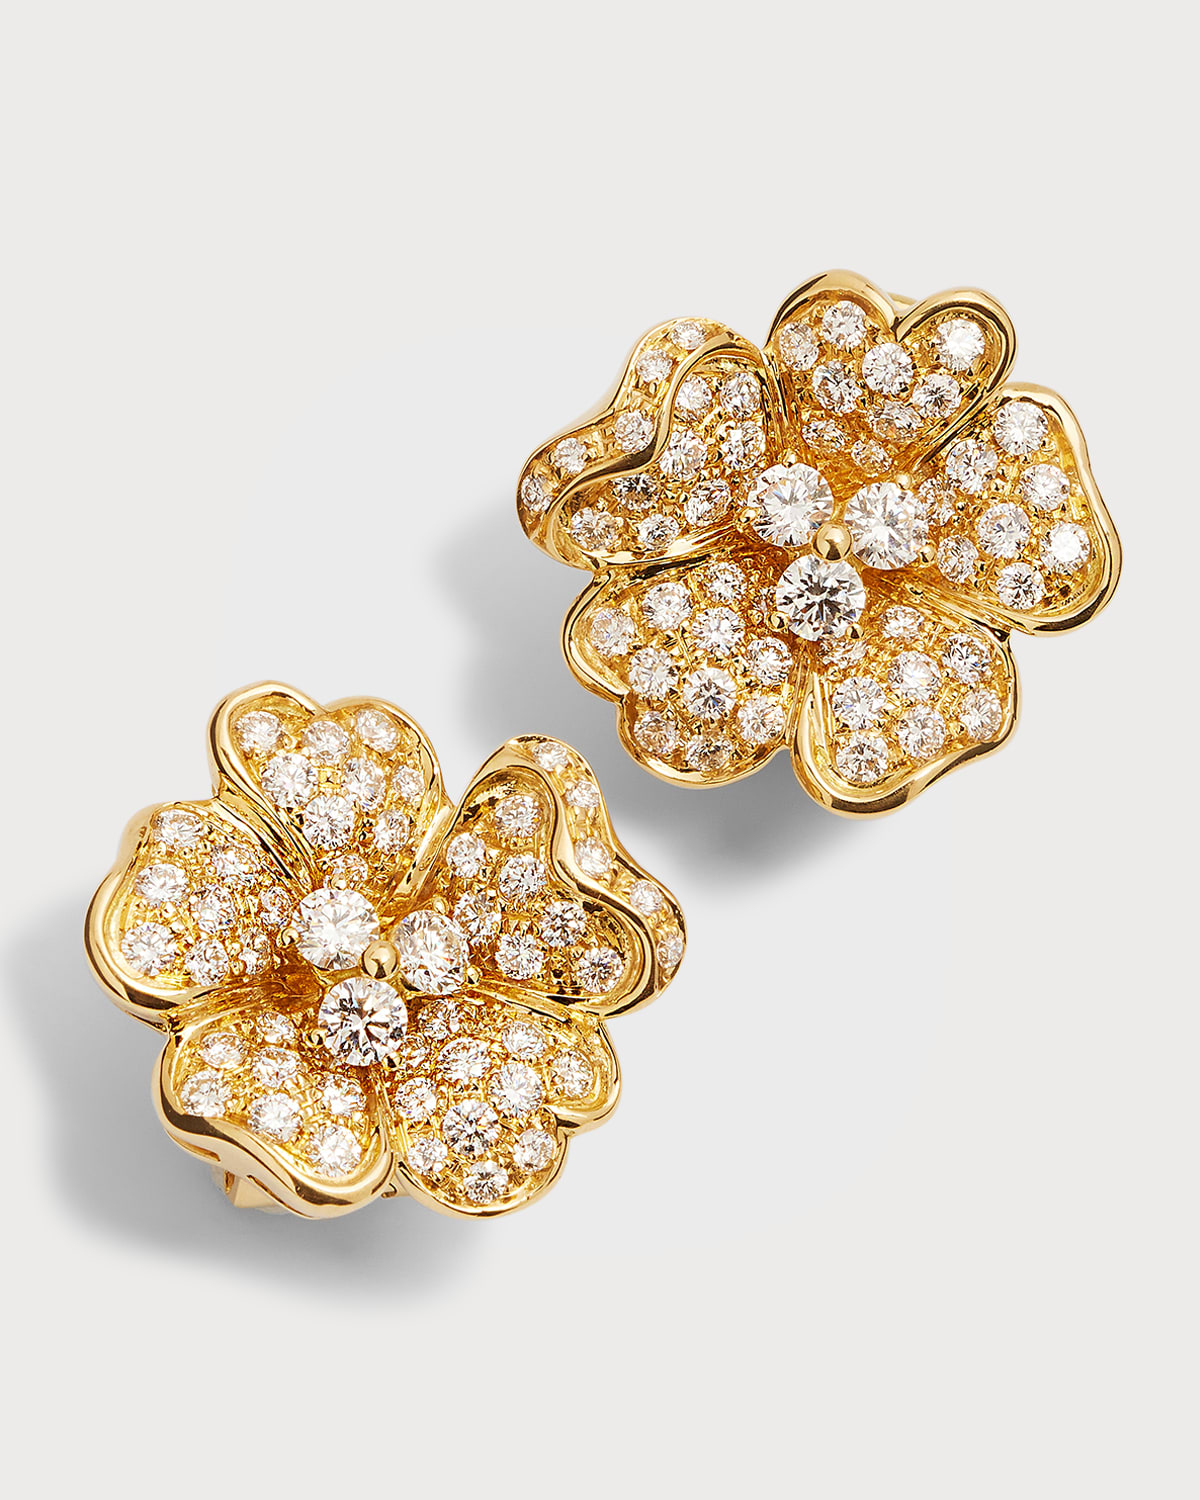 LEO PIZZO 18K YELLOW GOLD PAVE DIAMOND FLOWER BUTTON EARRINGS